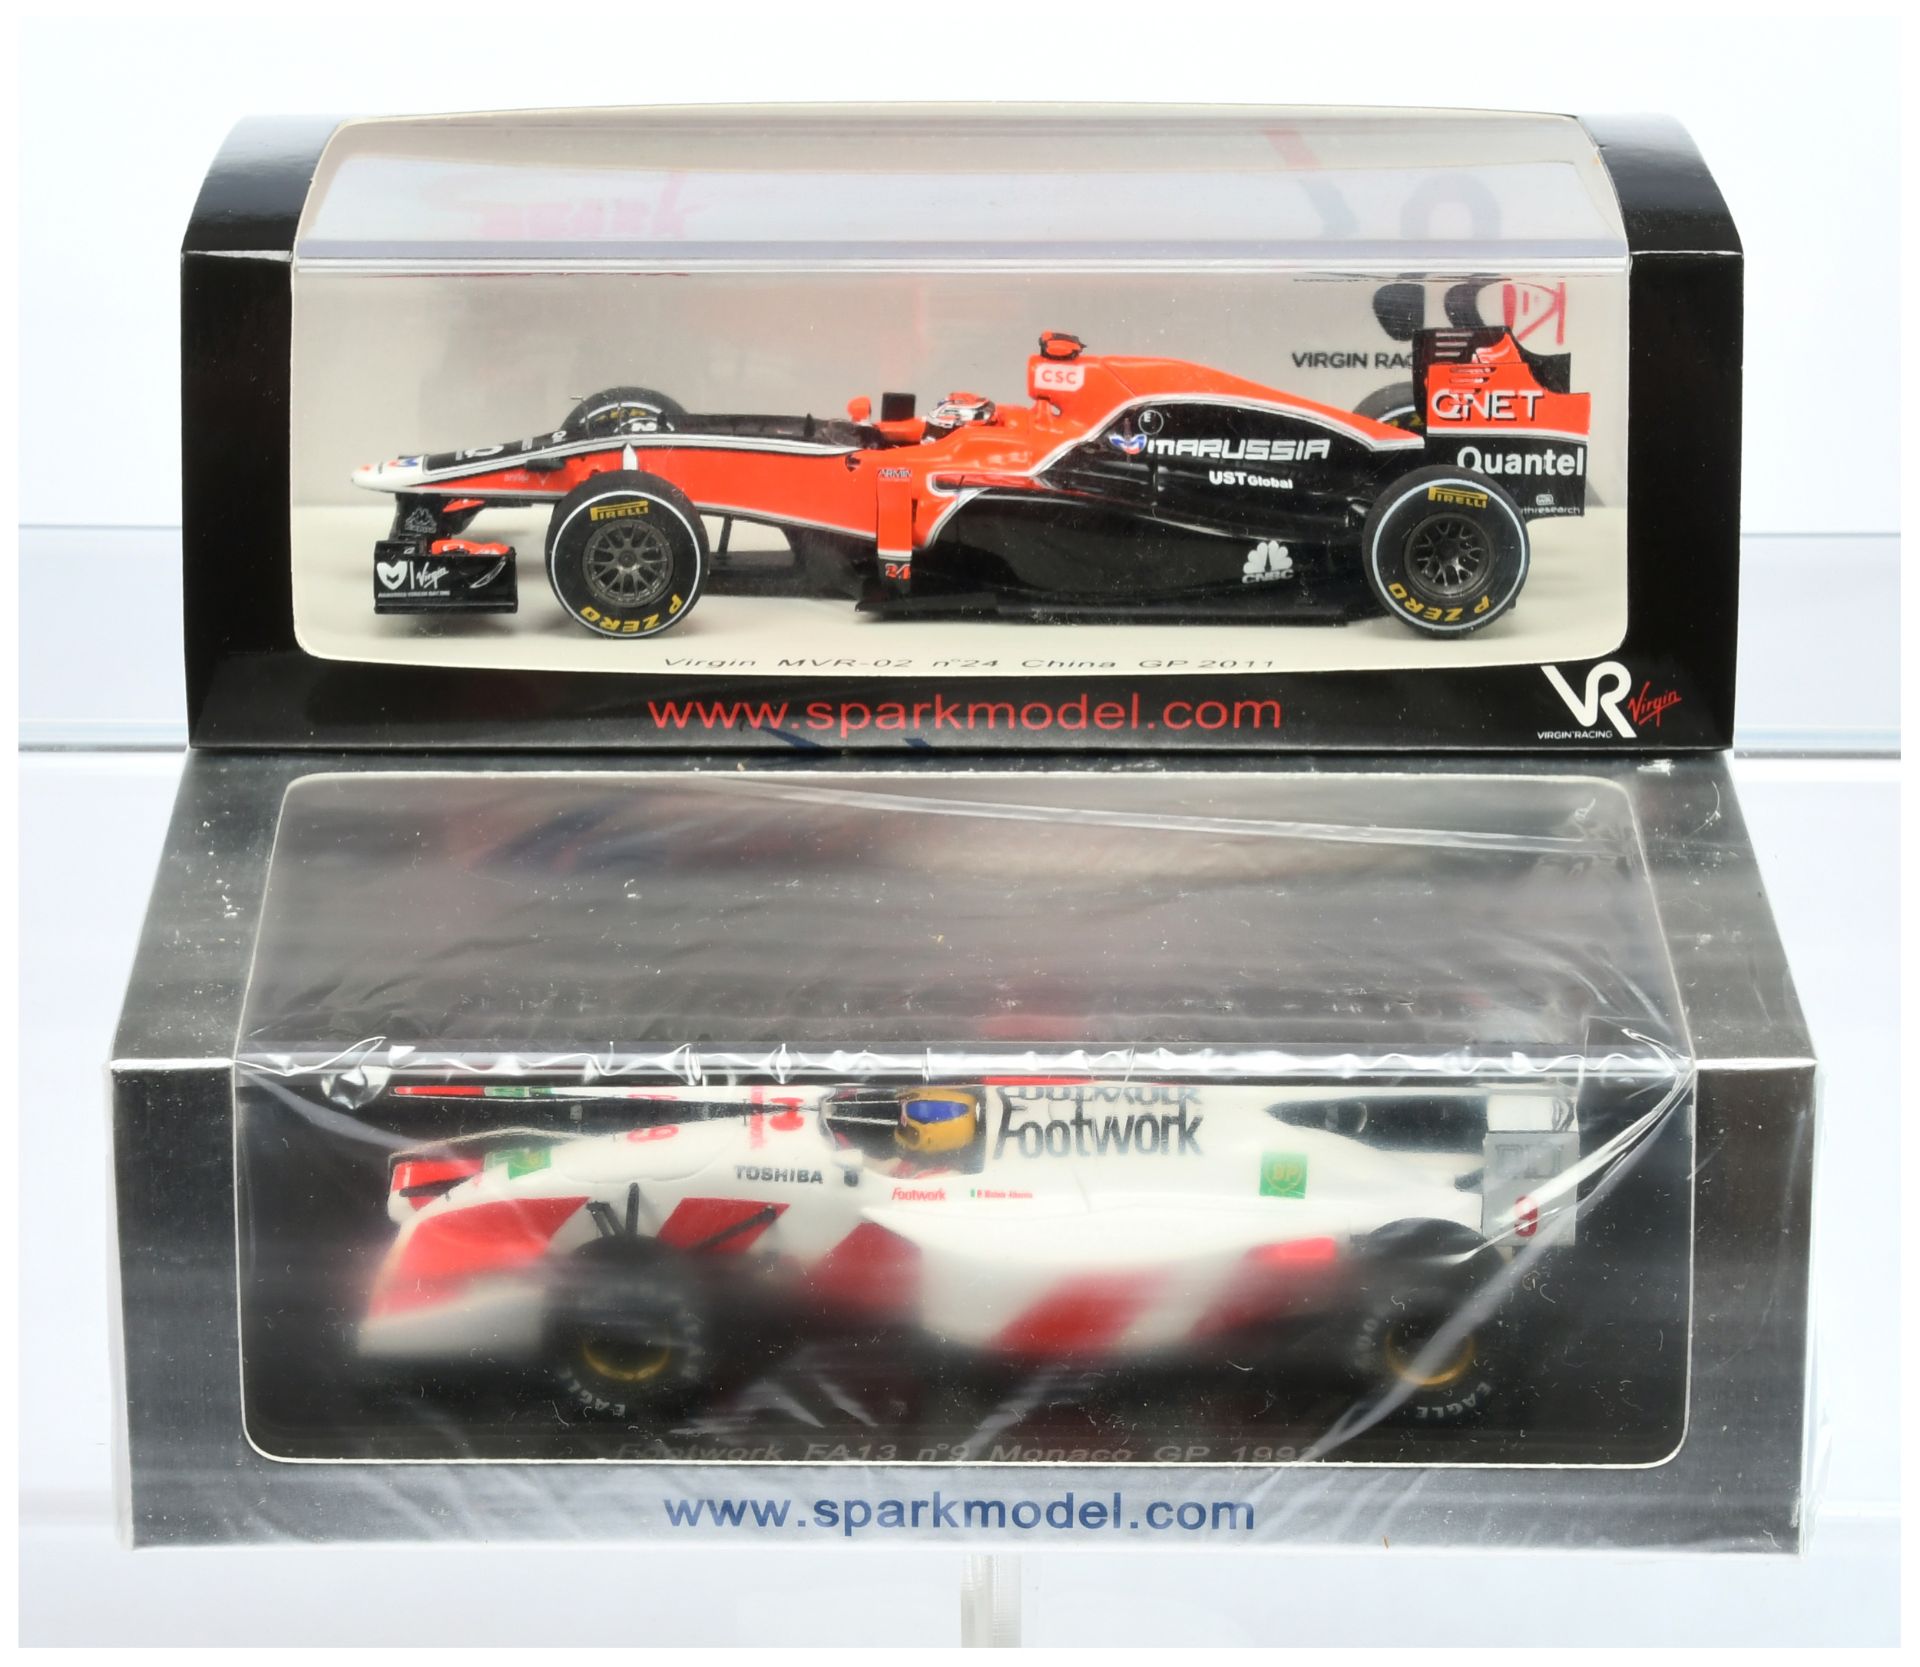 Spark Model (1/43rd) A Pair - (1) S3014 Vrigin MVR-02 "China" GP 2011 and (2) S3983 Footwork FA13...